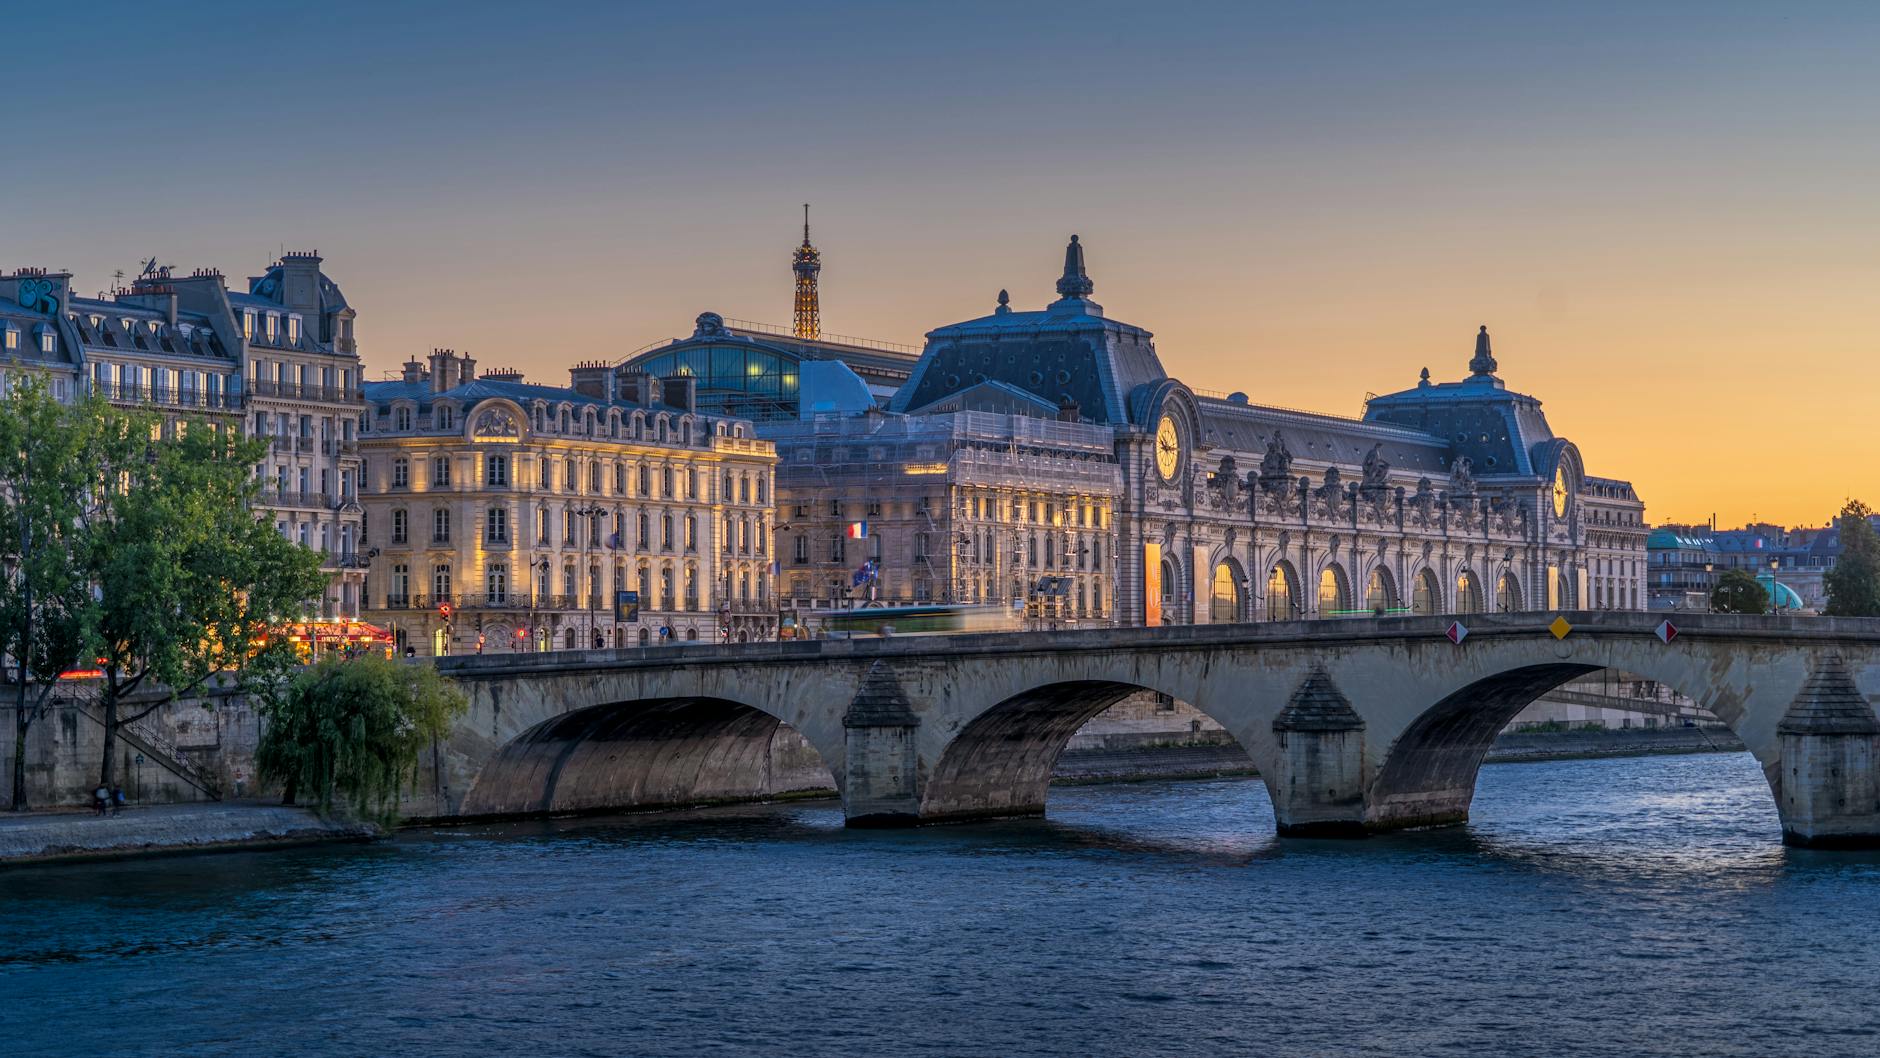 pont royal bridge across seine river in paris france with orsay museum on background